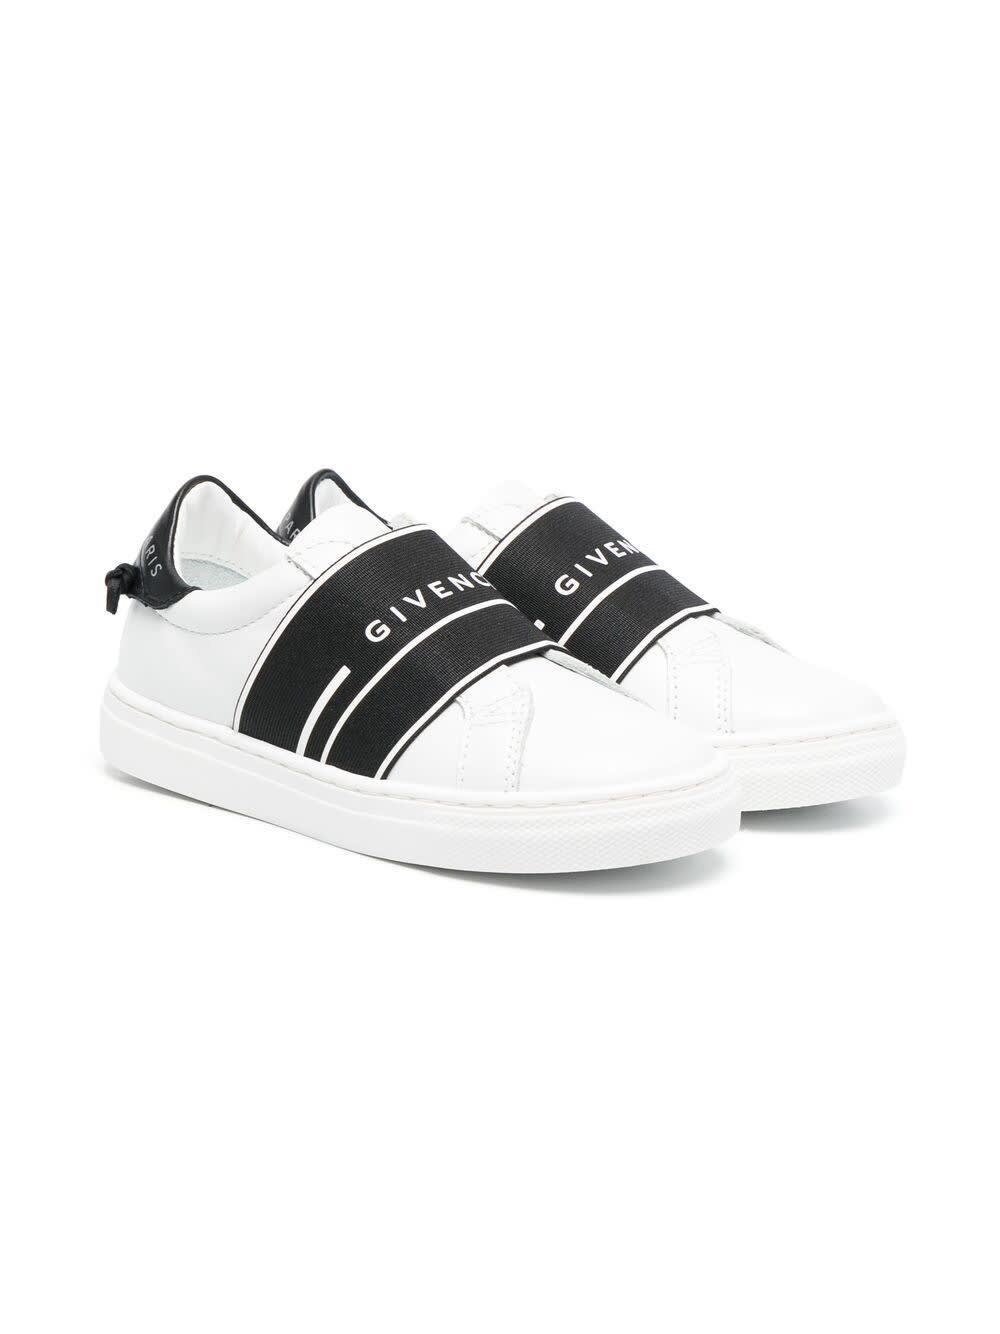 Givenchy Urban Street Sneakers With Black Band